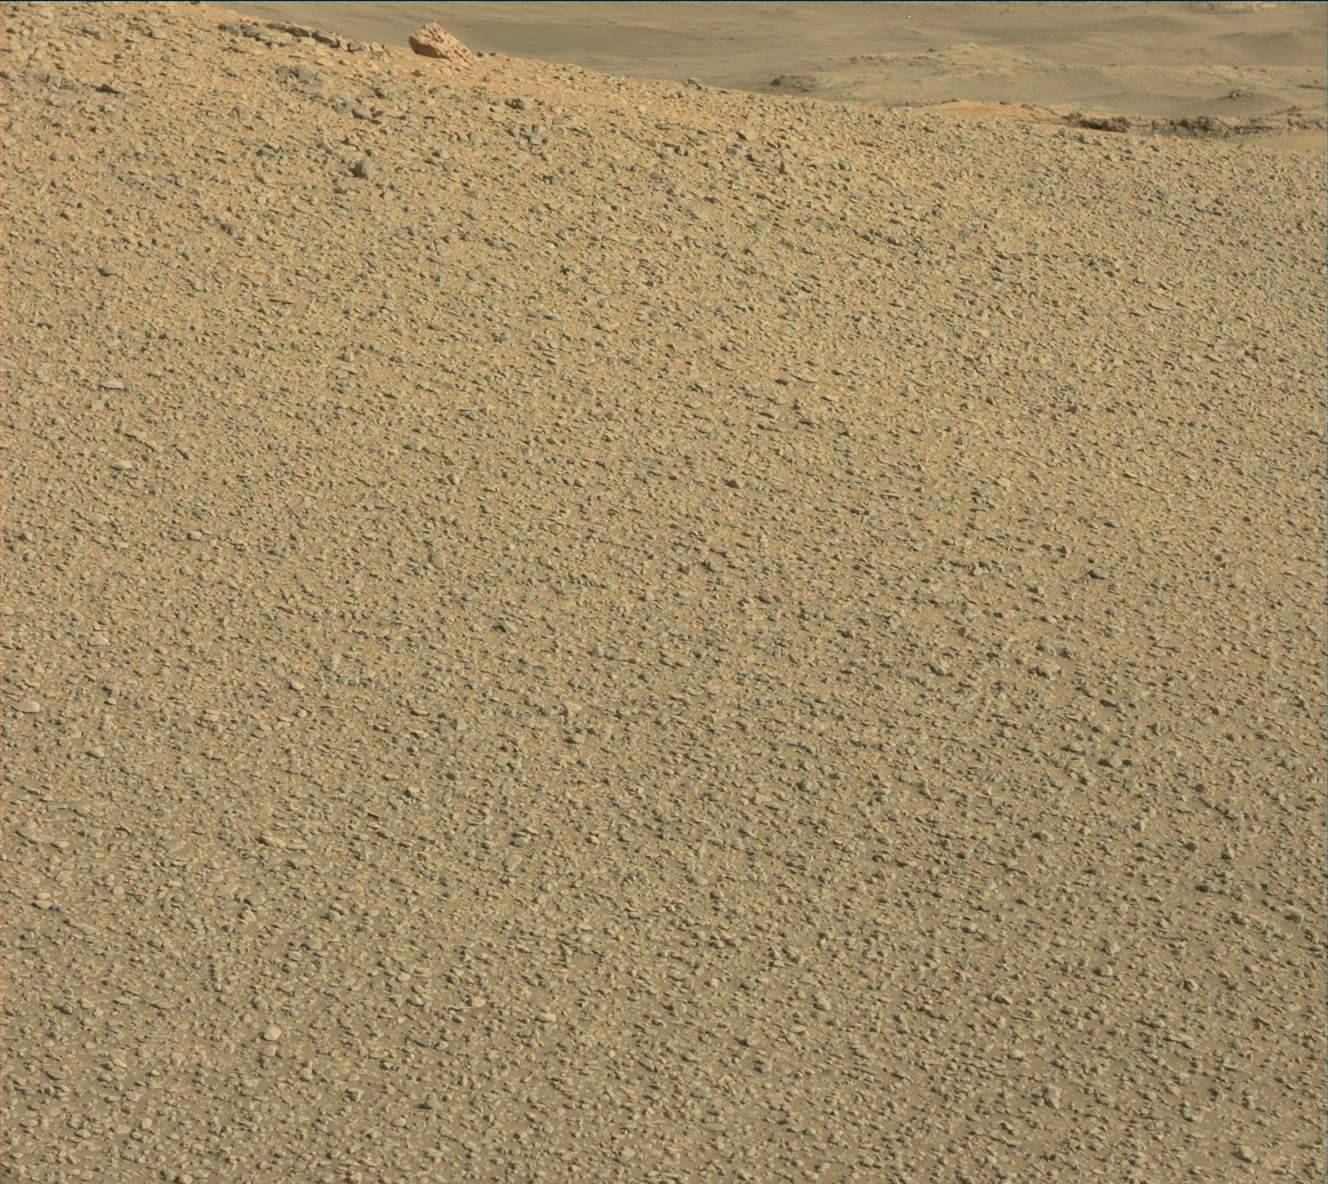 Sol 2436: So many choices, so little time